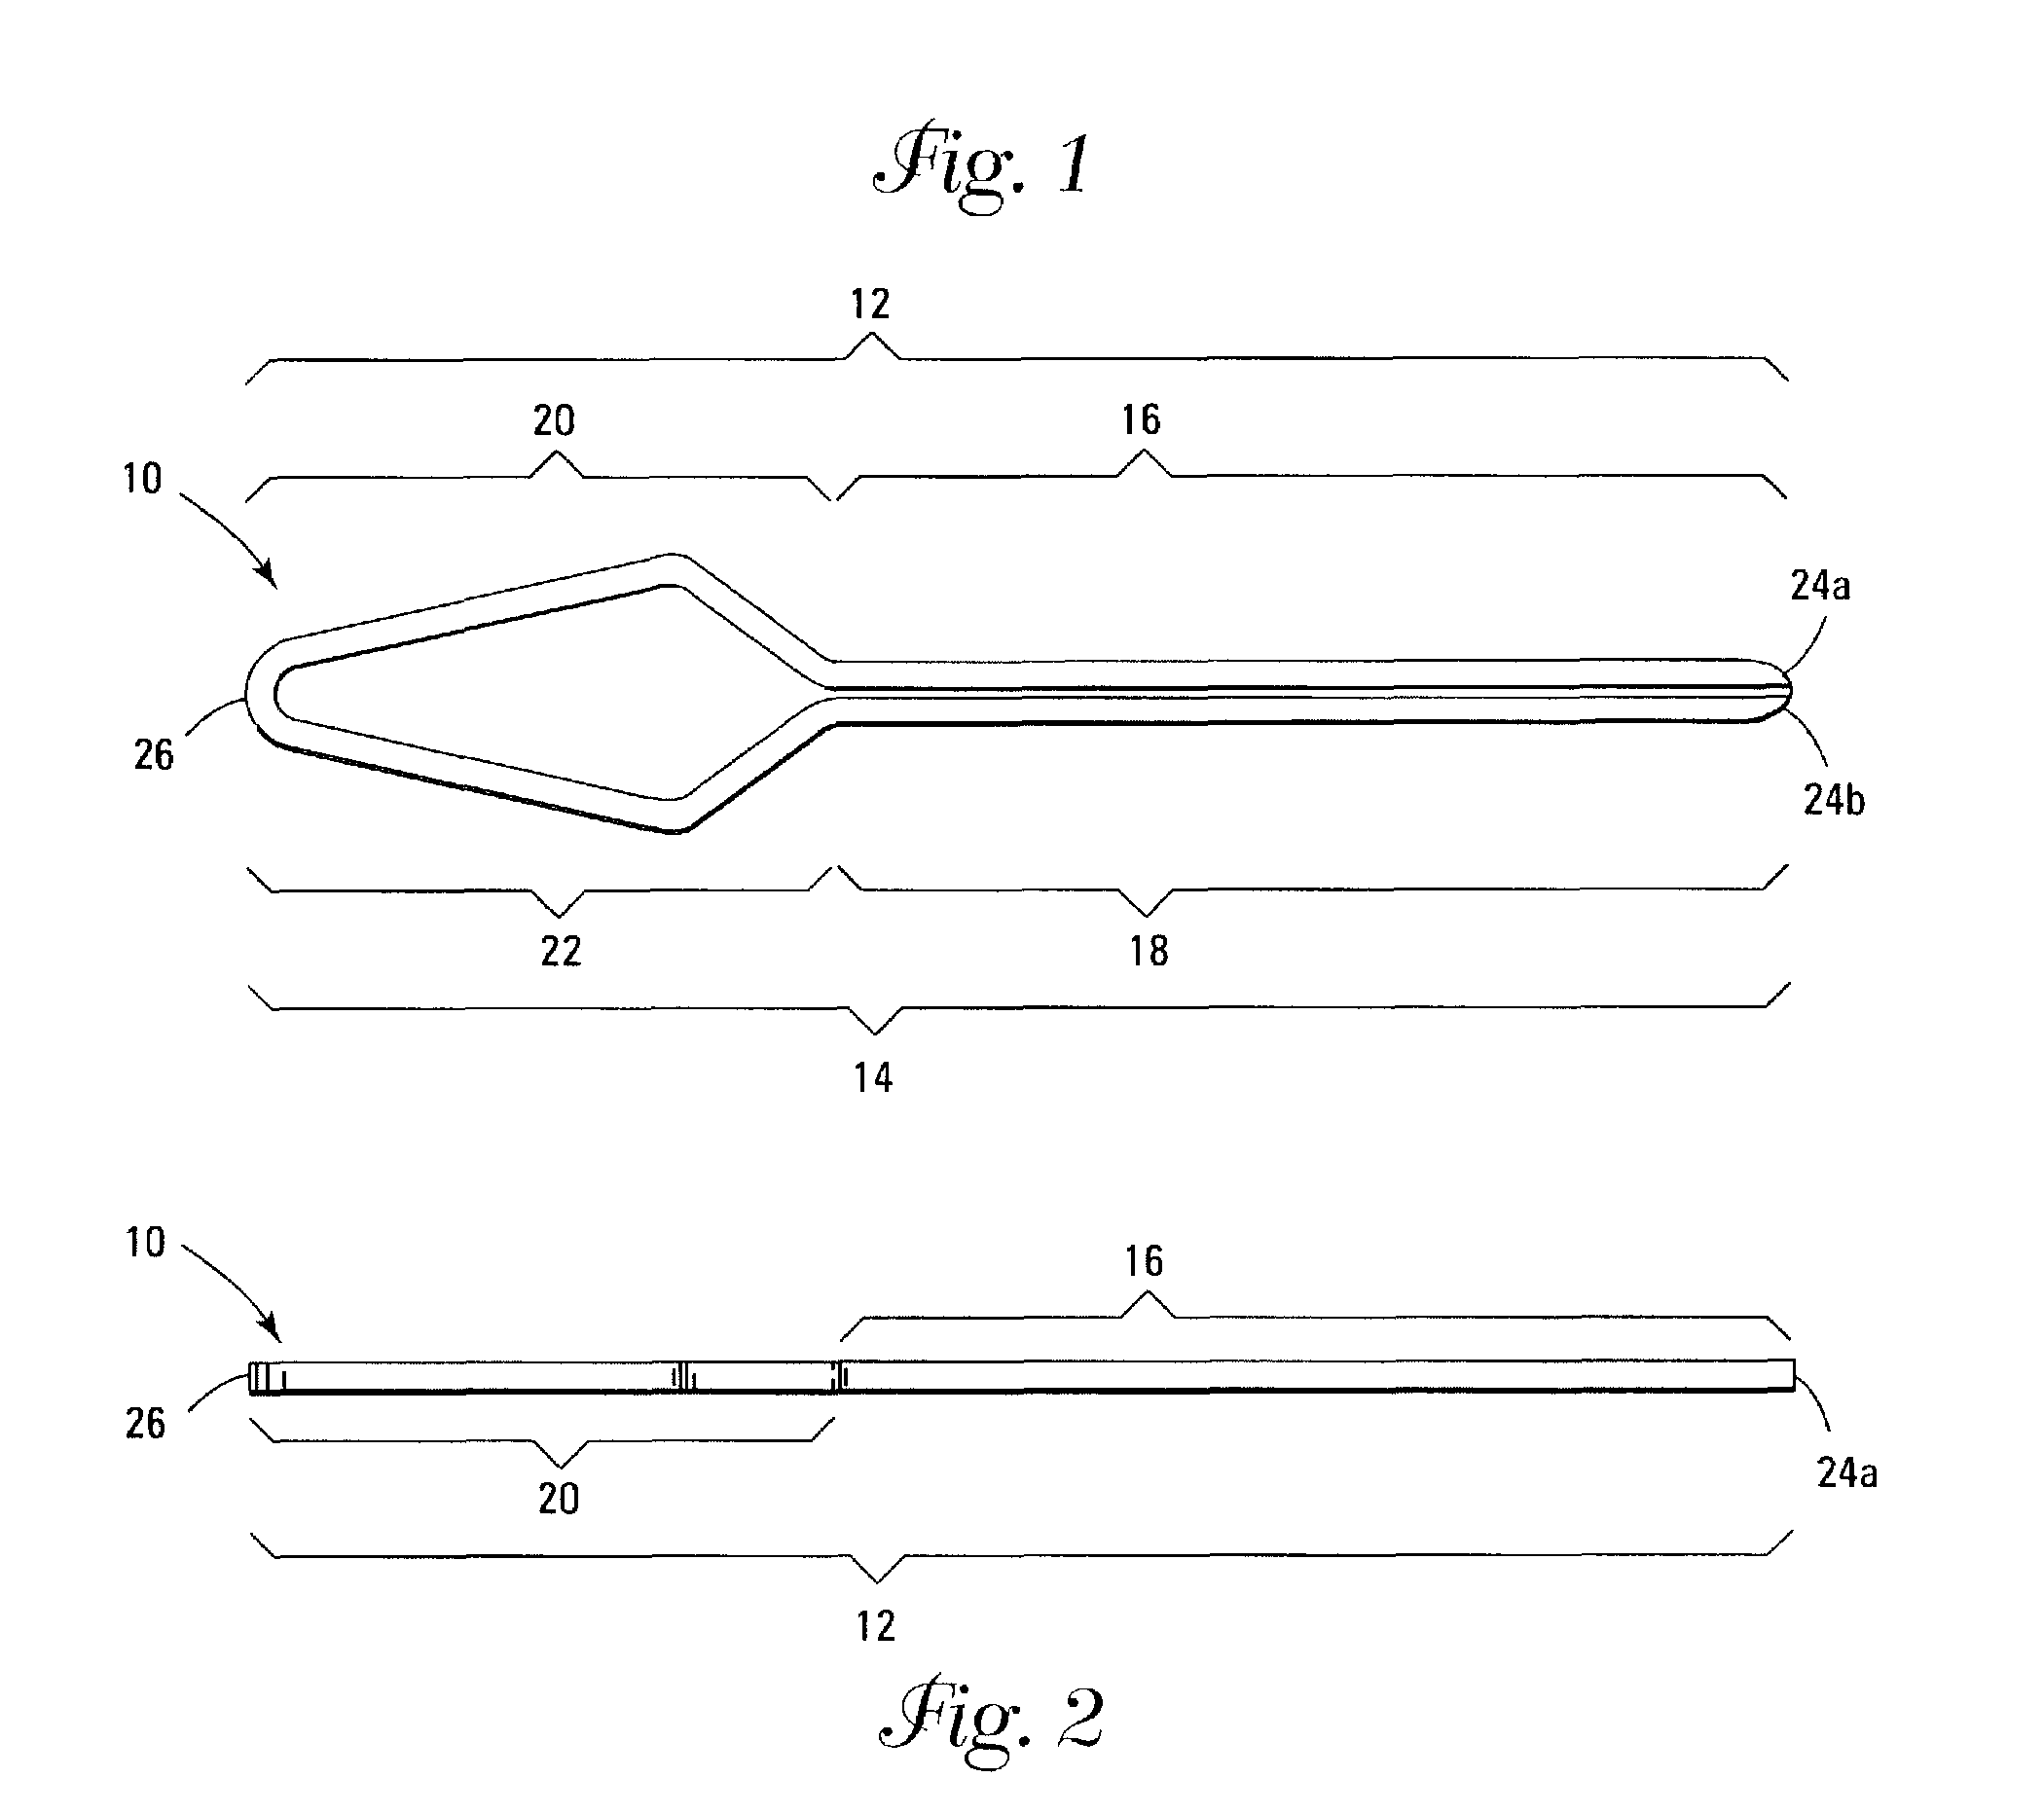 Non-invasive surgical ligation clip system and method of using